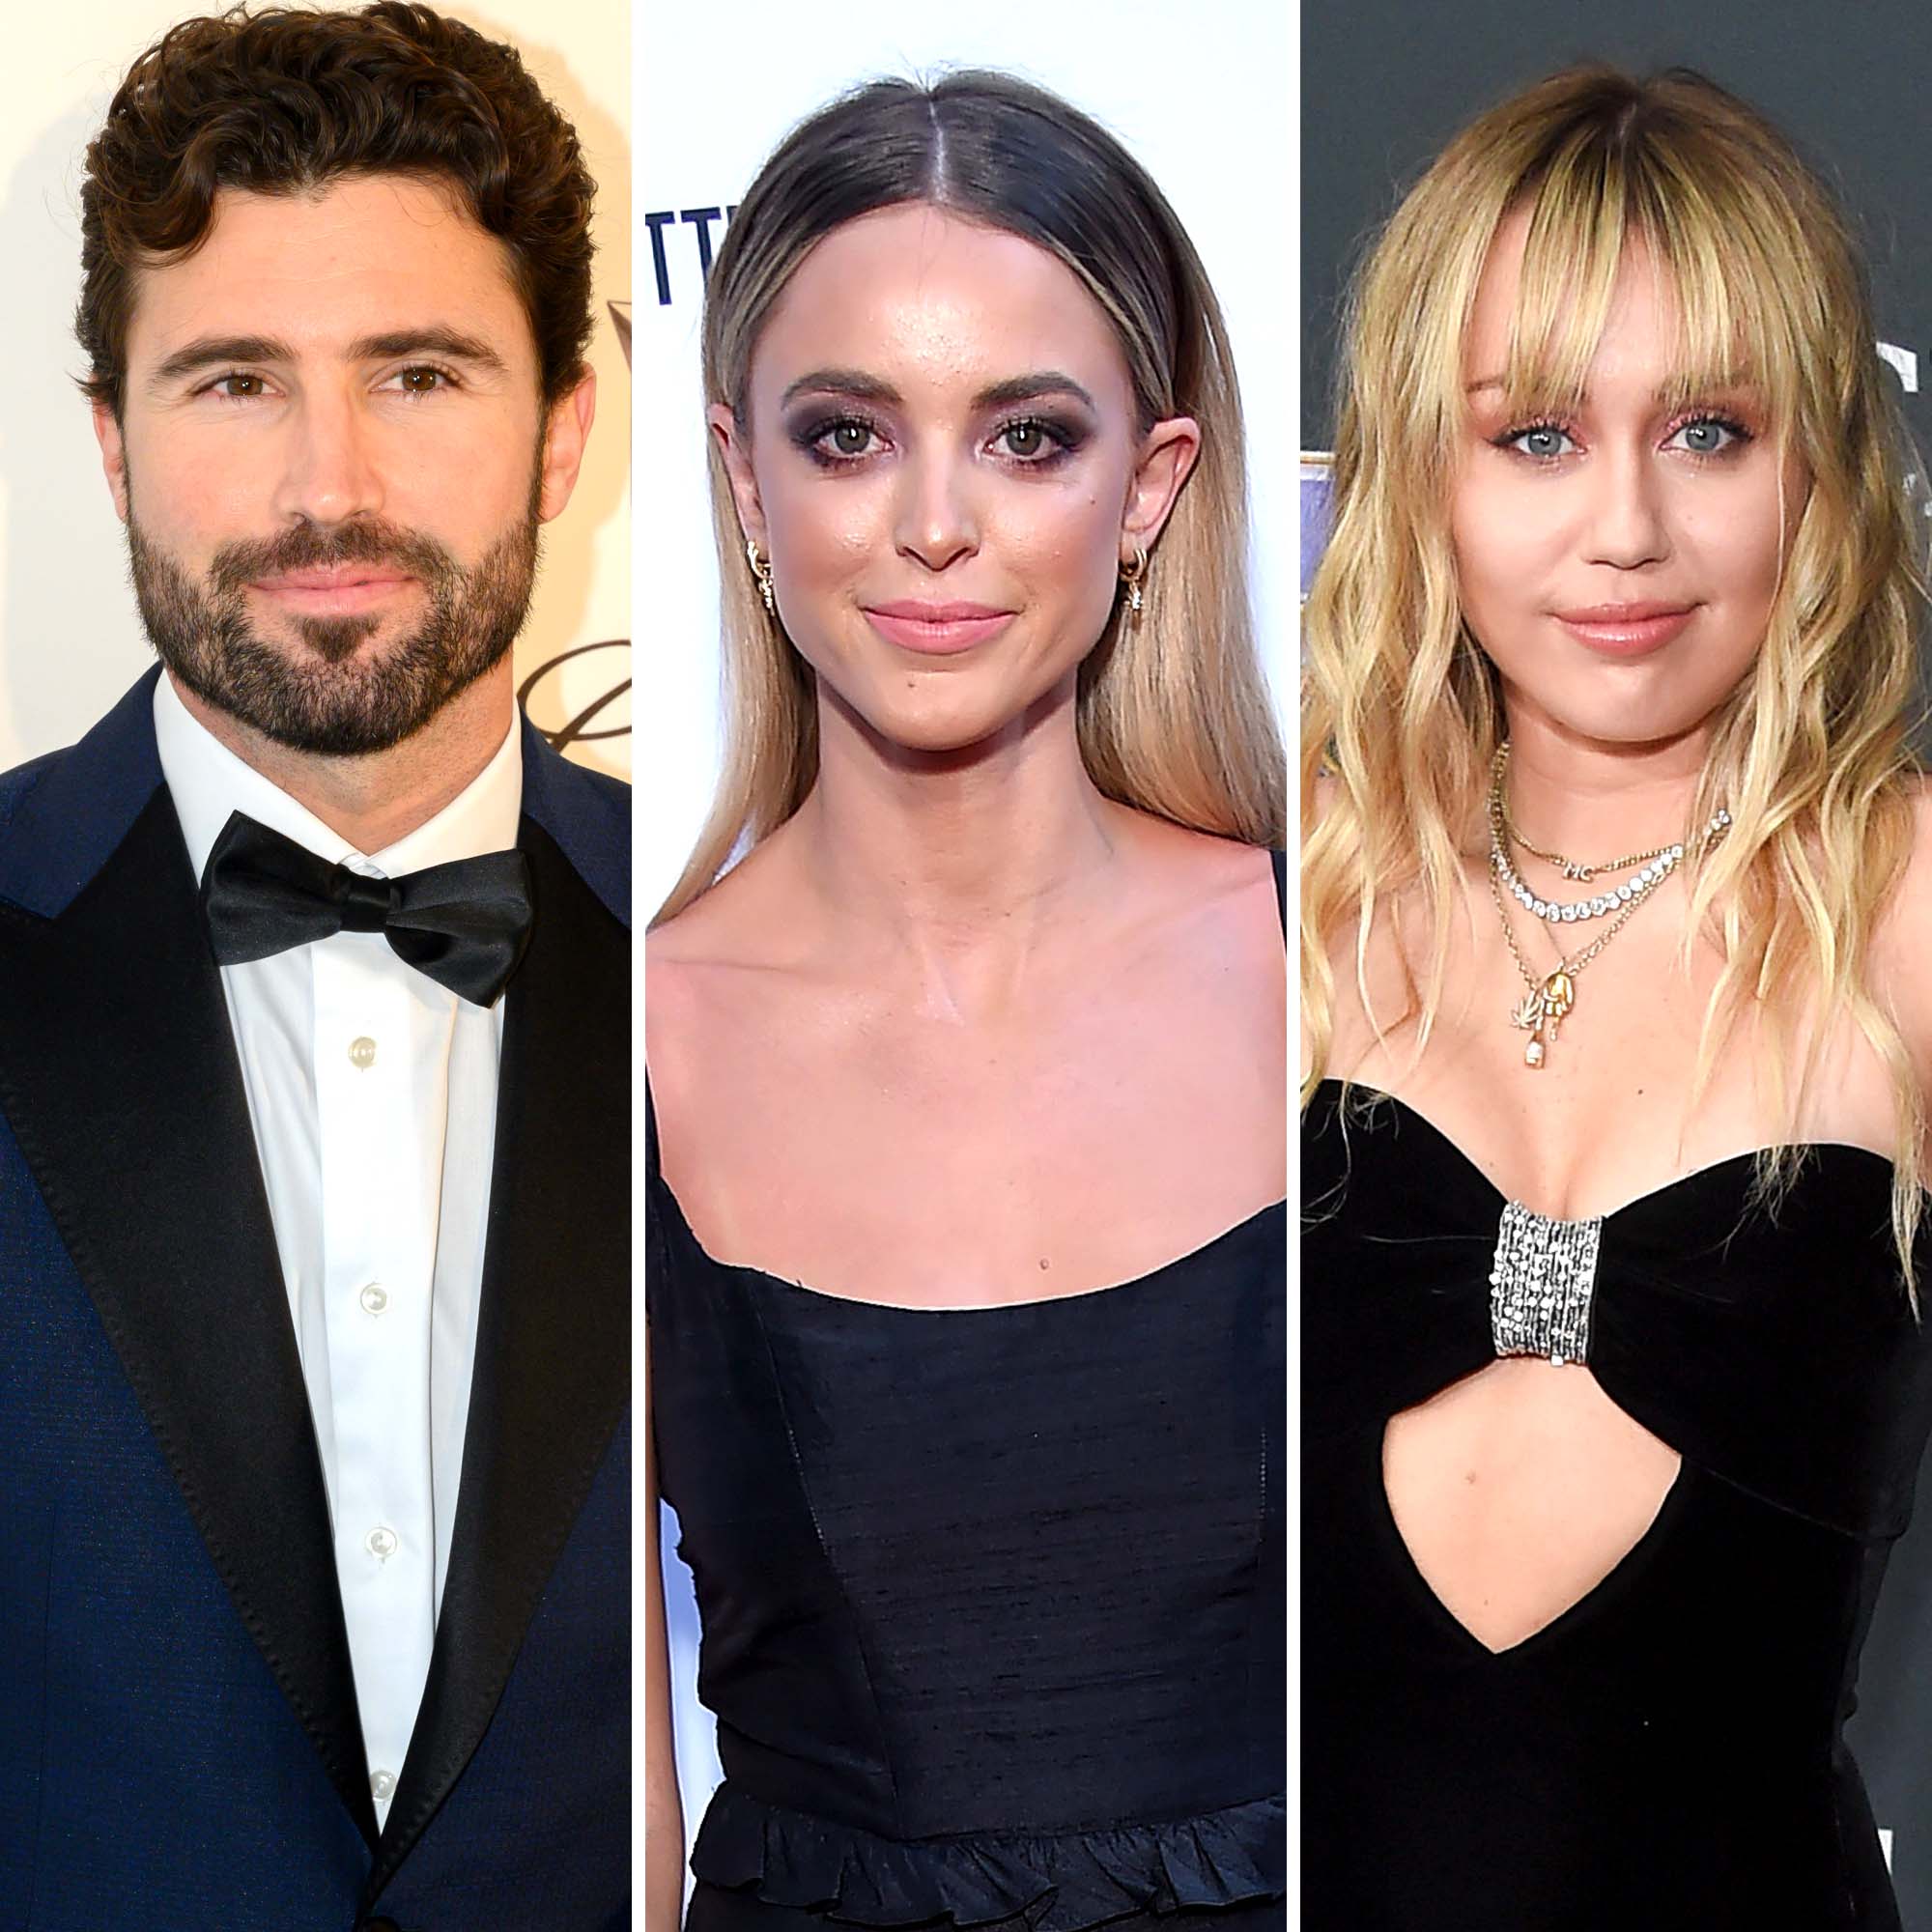 Alyson Stoner Lesbian Porn - Brody Jenner: 'It Was a Shock' Seeing Kaitlynn Carter With Miley Cyrus